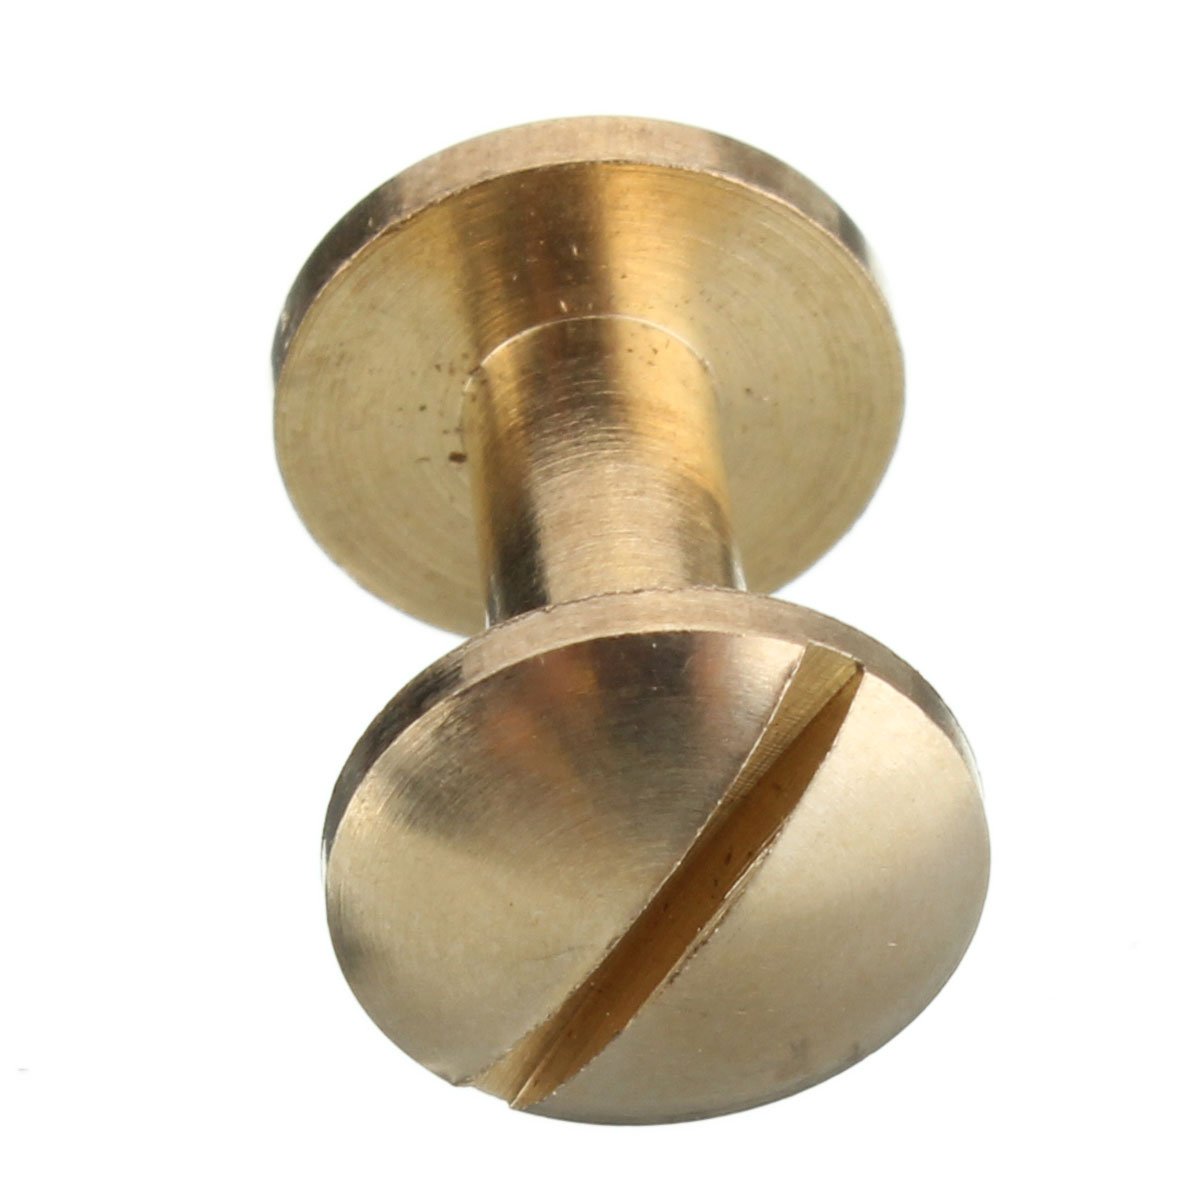 Solid-Brass-Arc-Button-Stud-Screw-Nail-4-15mm-Screw-Back-Leather-Belt-Button-Screws-1034256